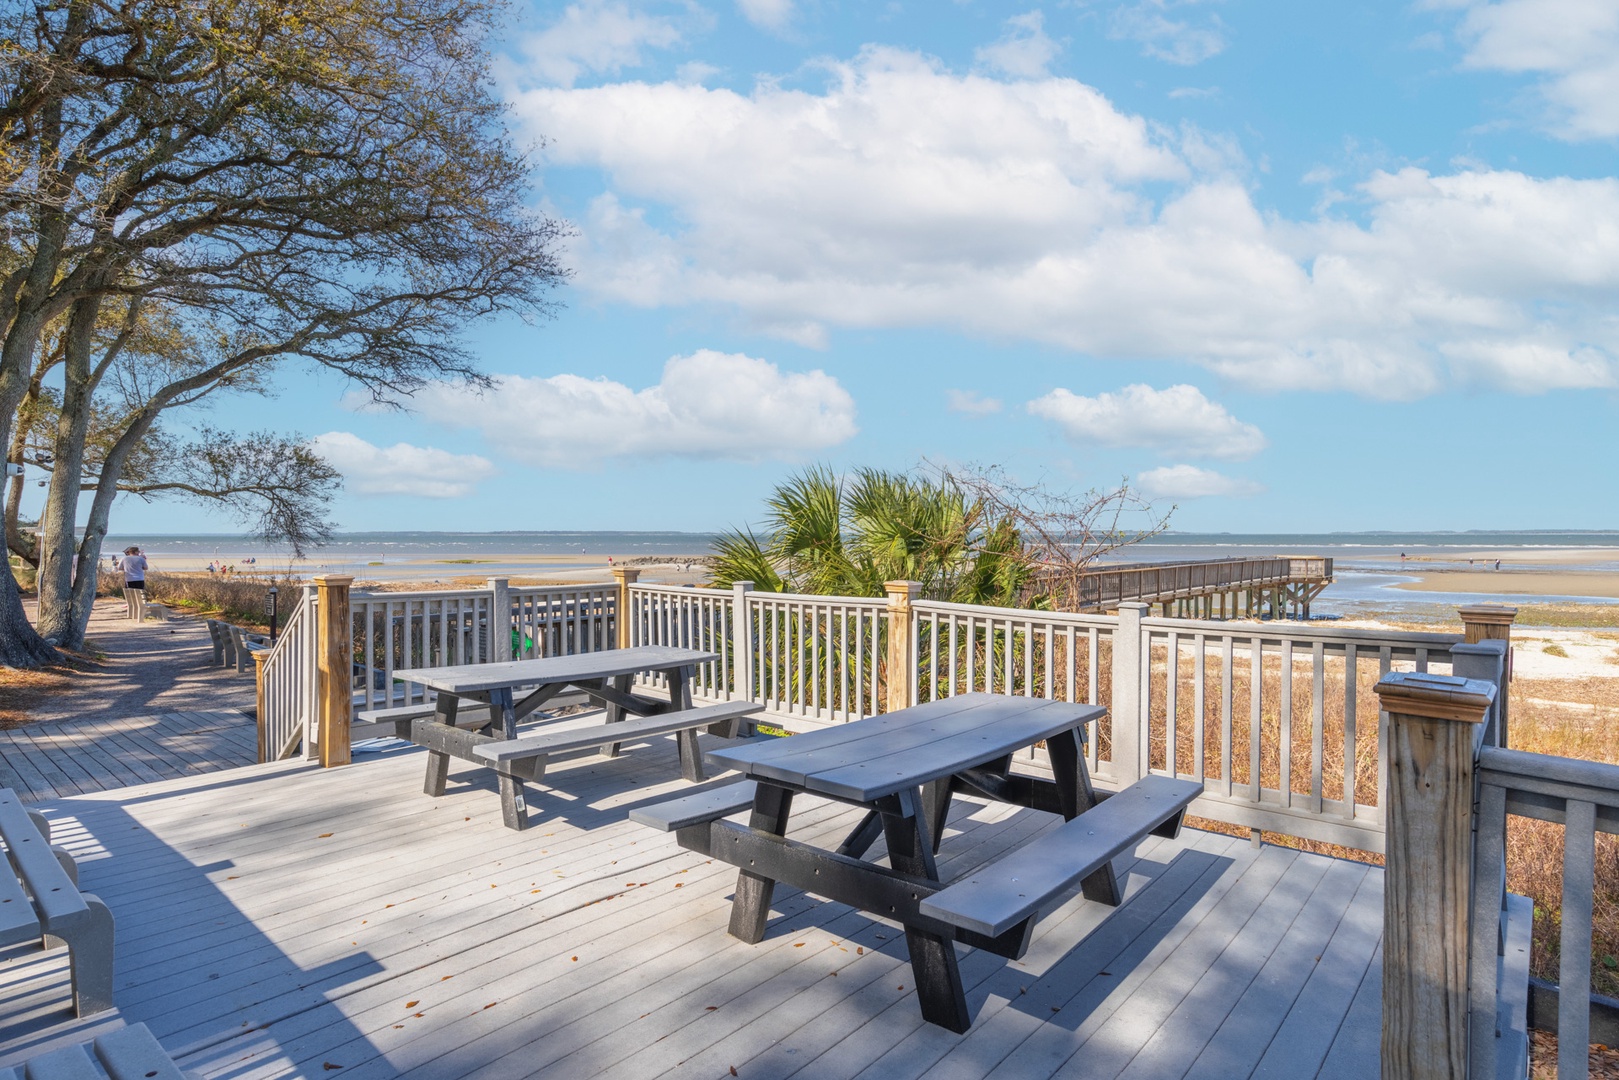 Grab a picnic table & dine alfresco with stunning ocean views